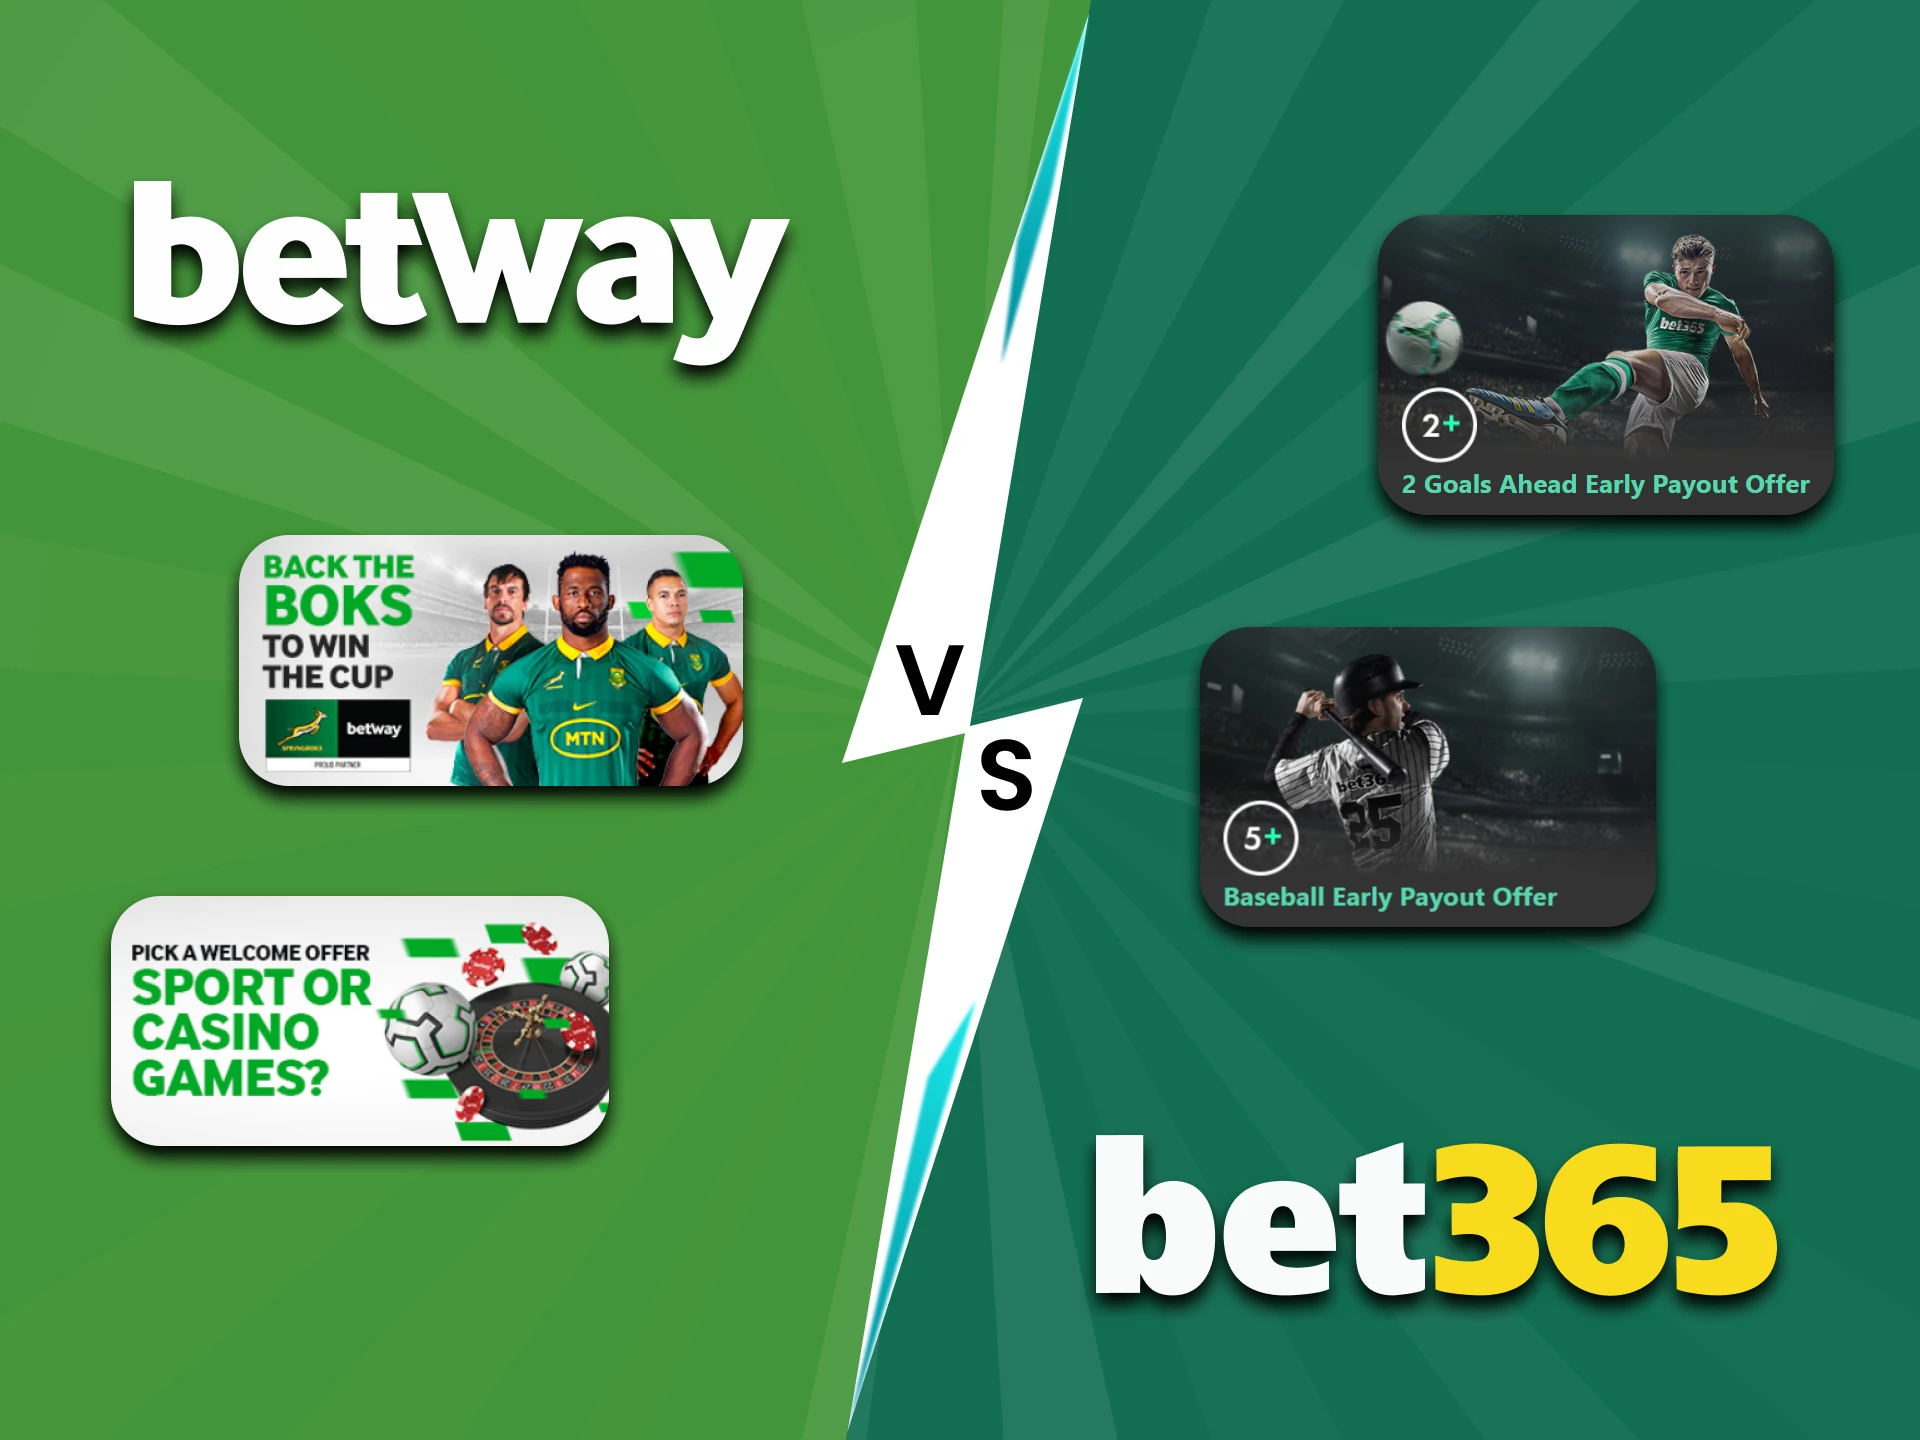 Find out about bonuses at Betway and Bet365.